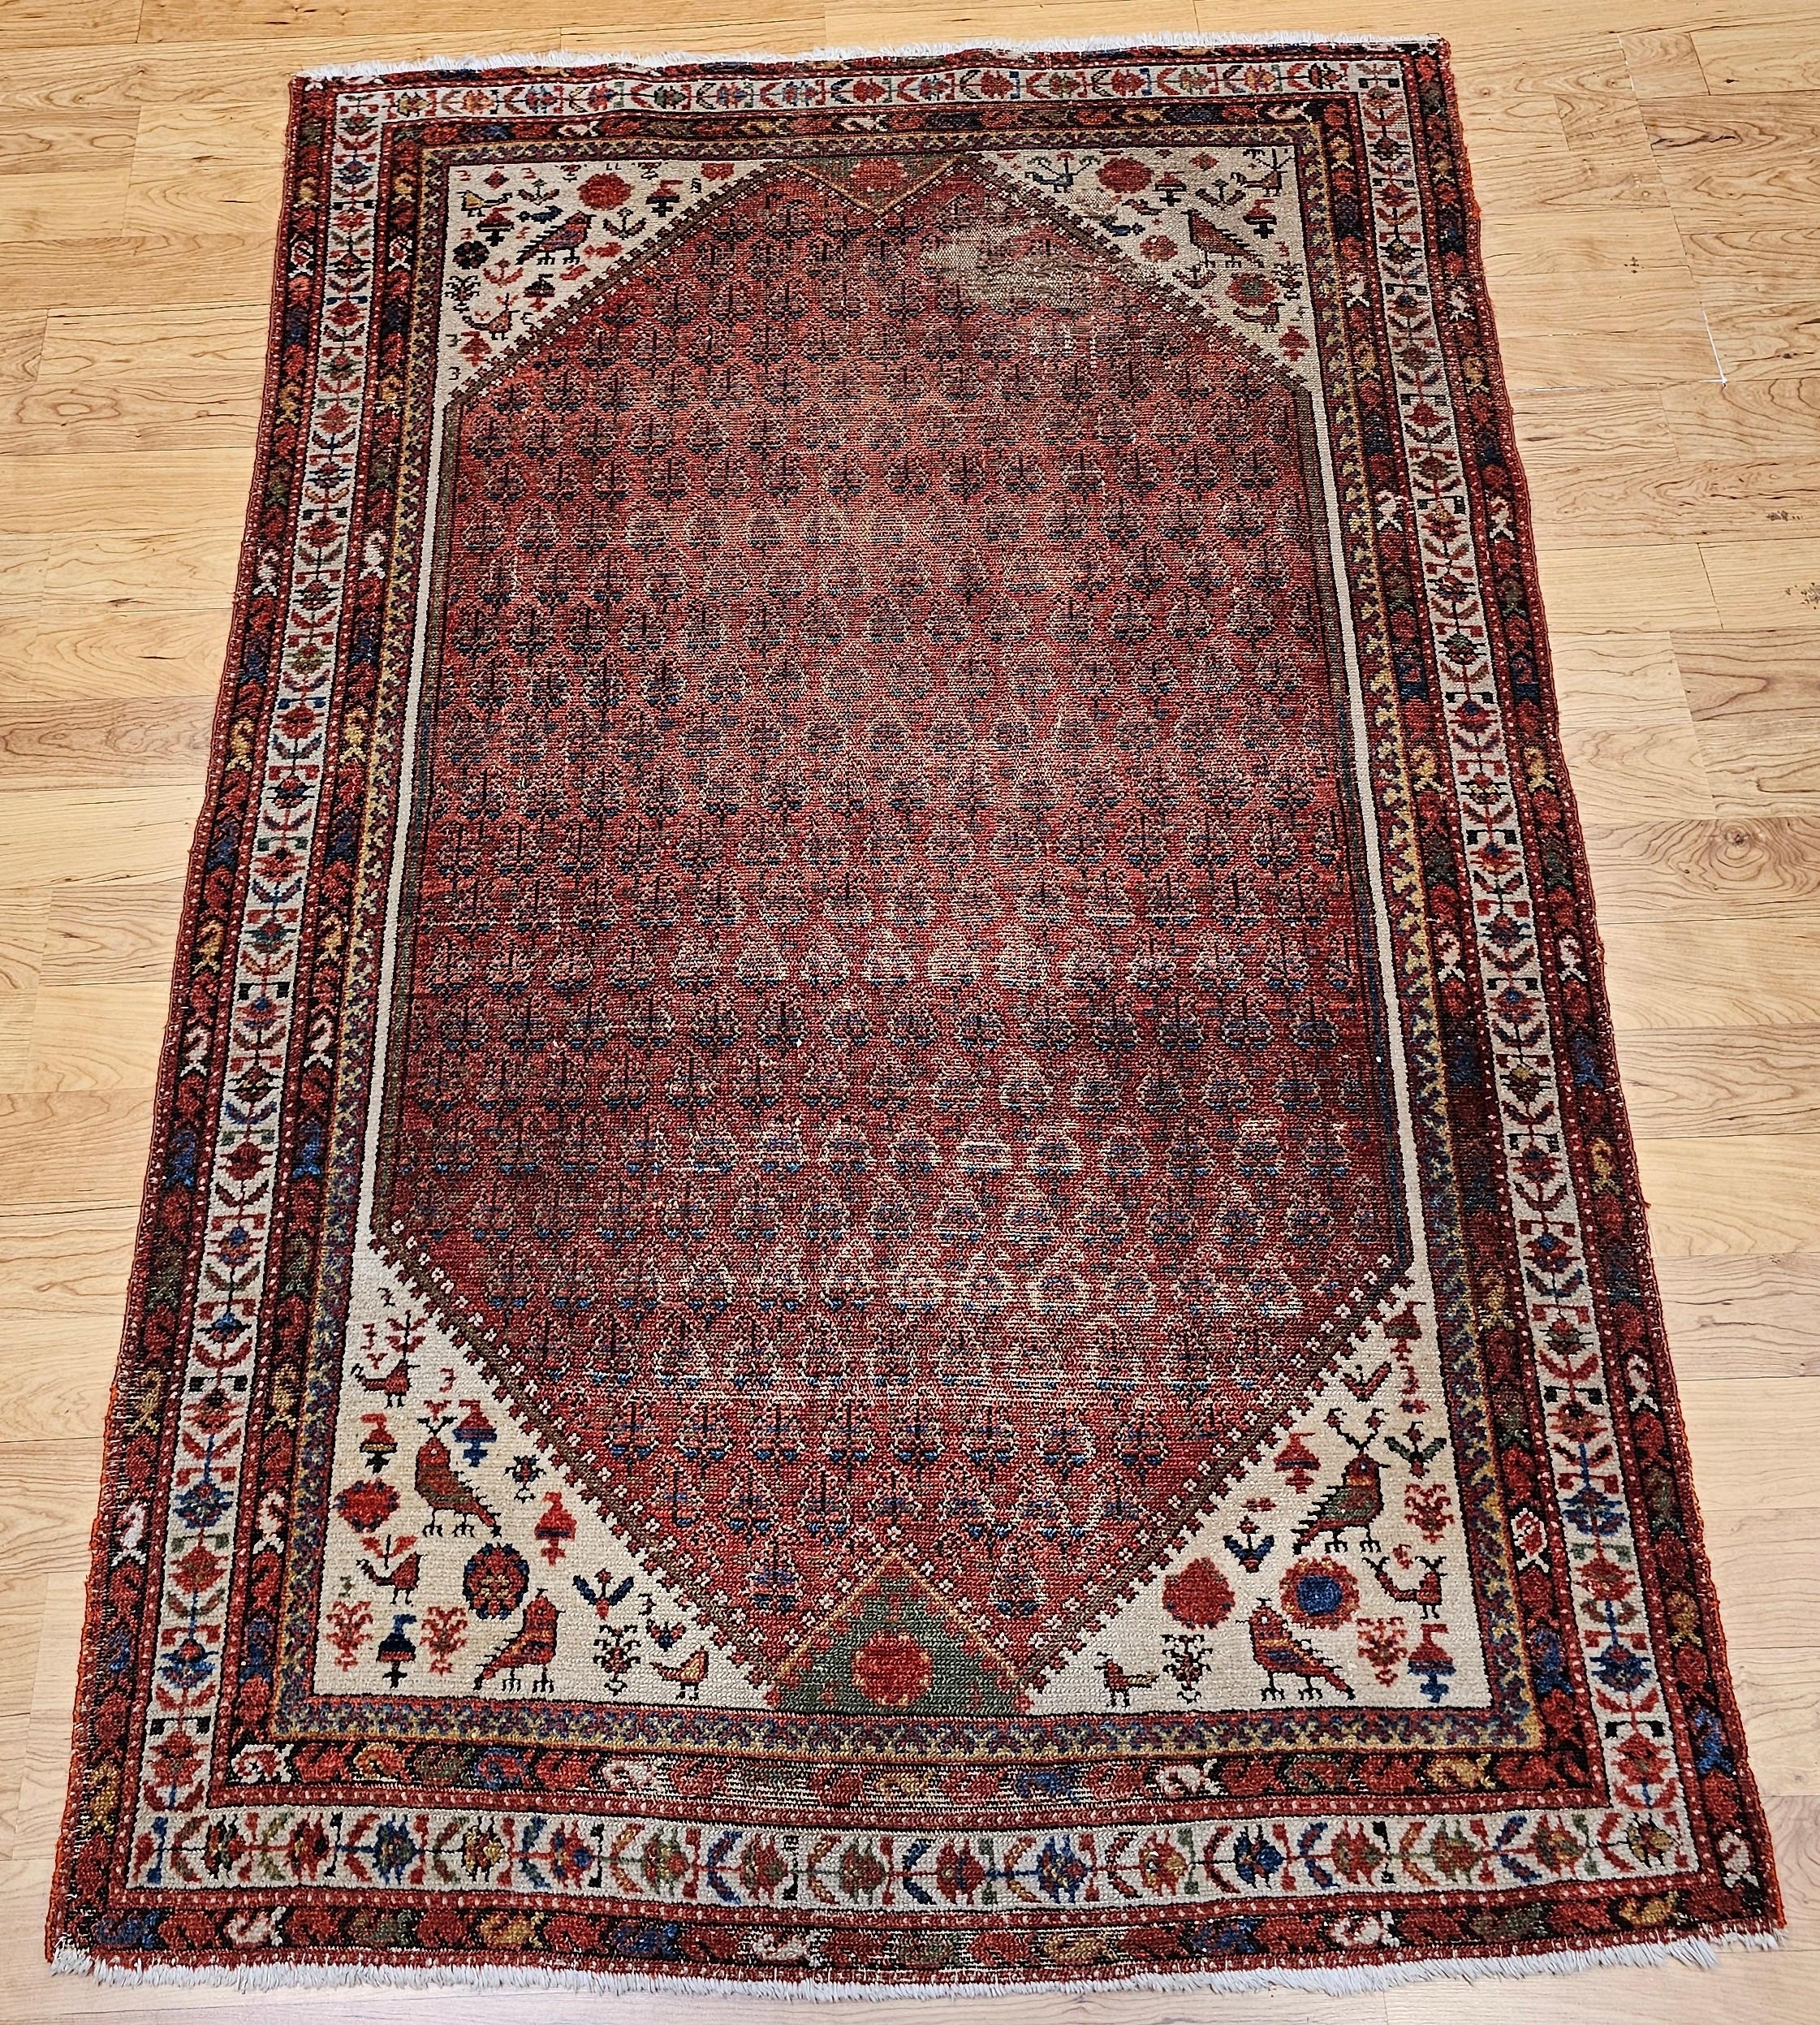 Vintage Persian Malayer area rug in an all over paisley pattern set on a dark red or burgundy background with an ivory color border.  The corner spandrels are in ivory with wonderful designs of birds.   There are little triangular areas on each end